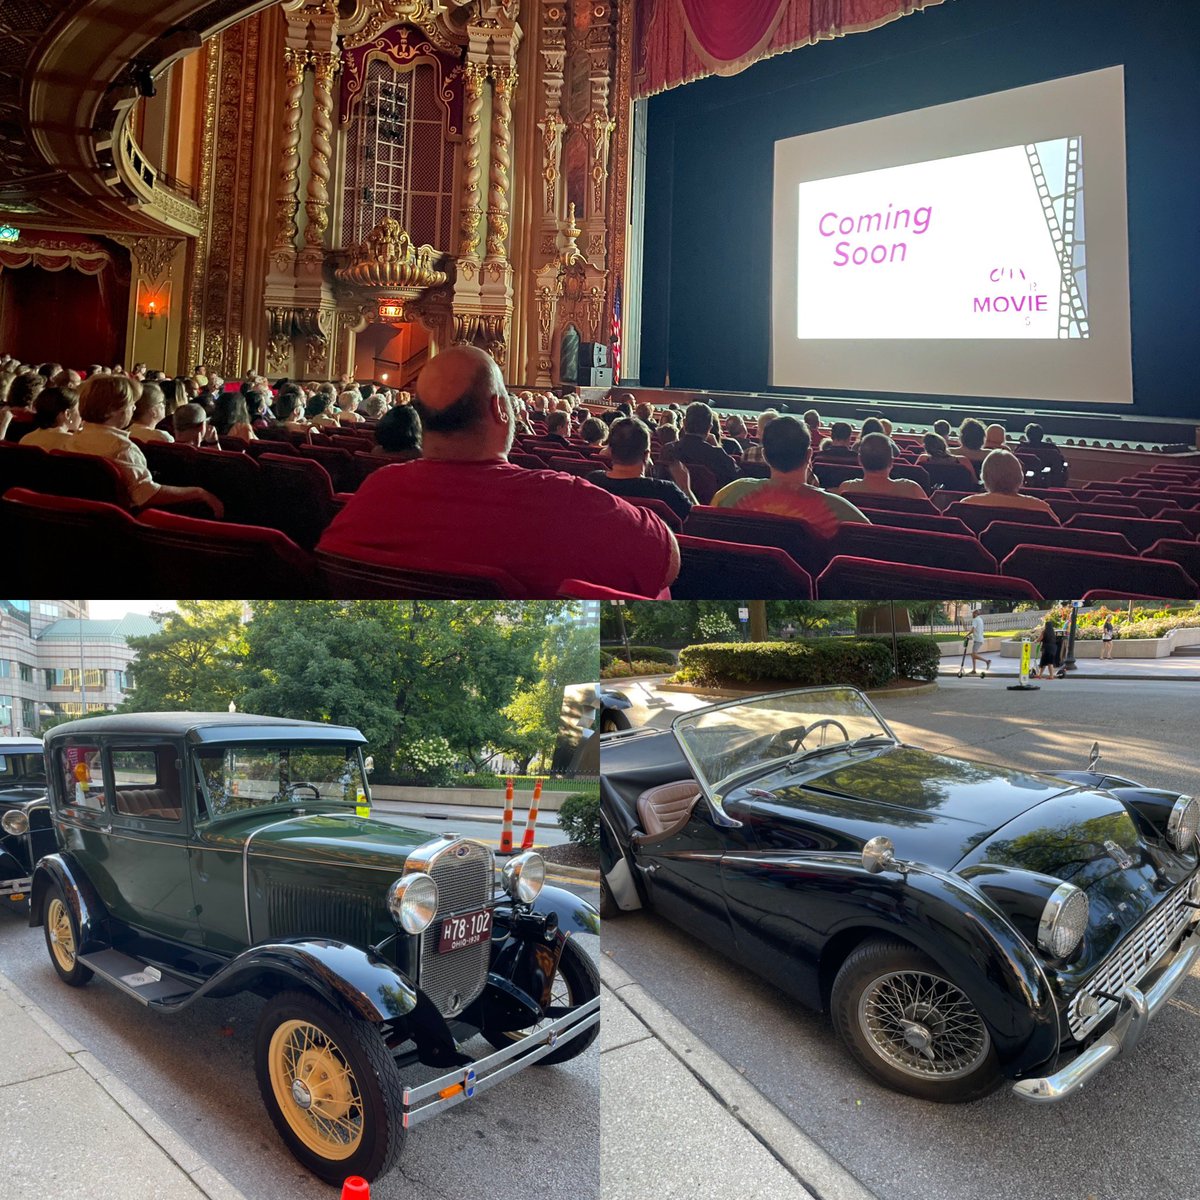 The classic cars came out to the #OhioTheatre for their screening of #OurHospitality starring #BusterKeaton and #HighAndDizzy with #HaroldLloyd. There was a great turnout and #ClarkWilson played his heart out on the #MortonOrgan. #SilentFilm #ModelA